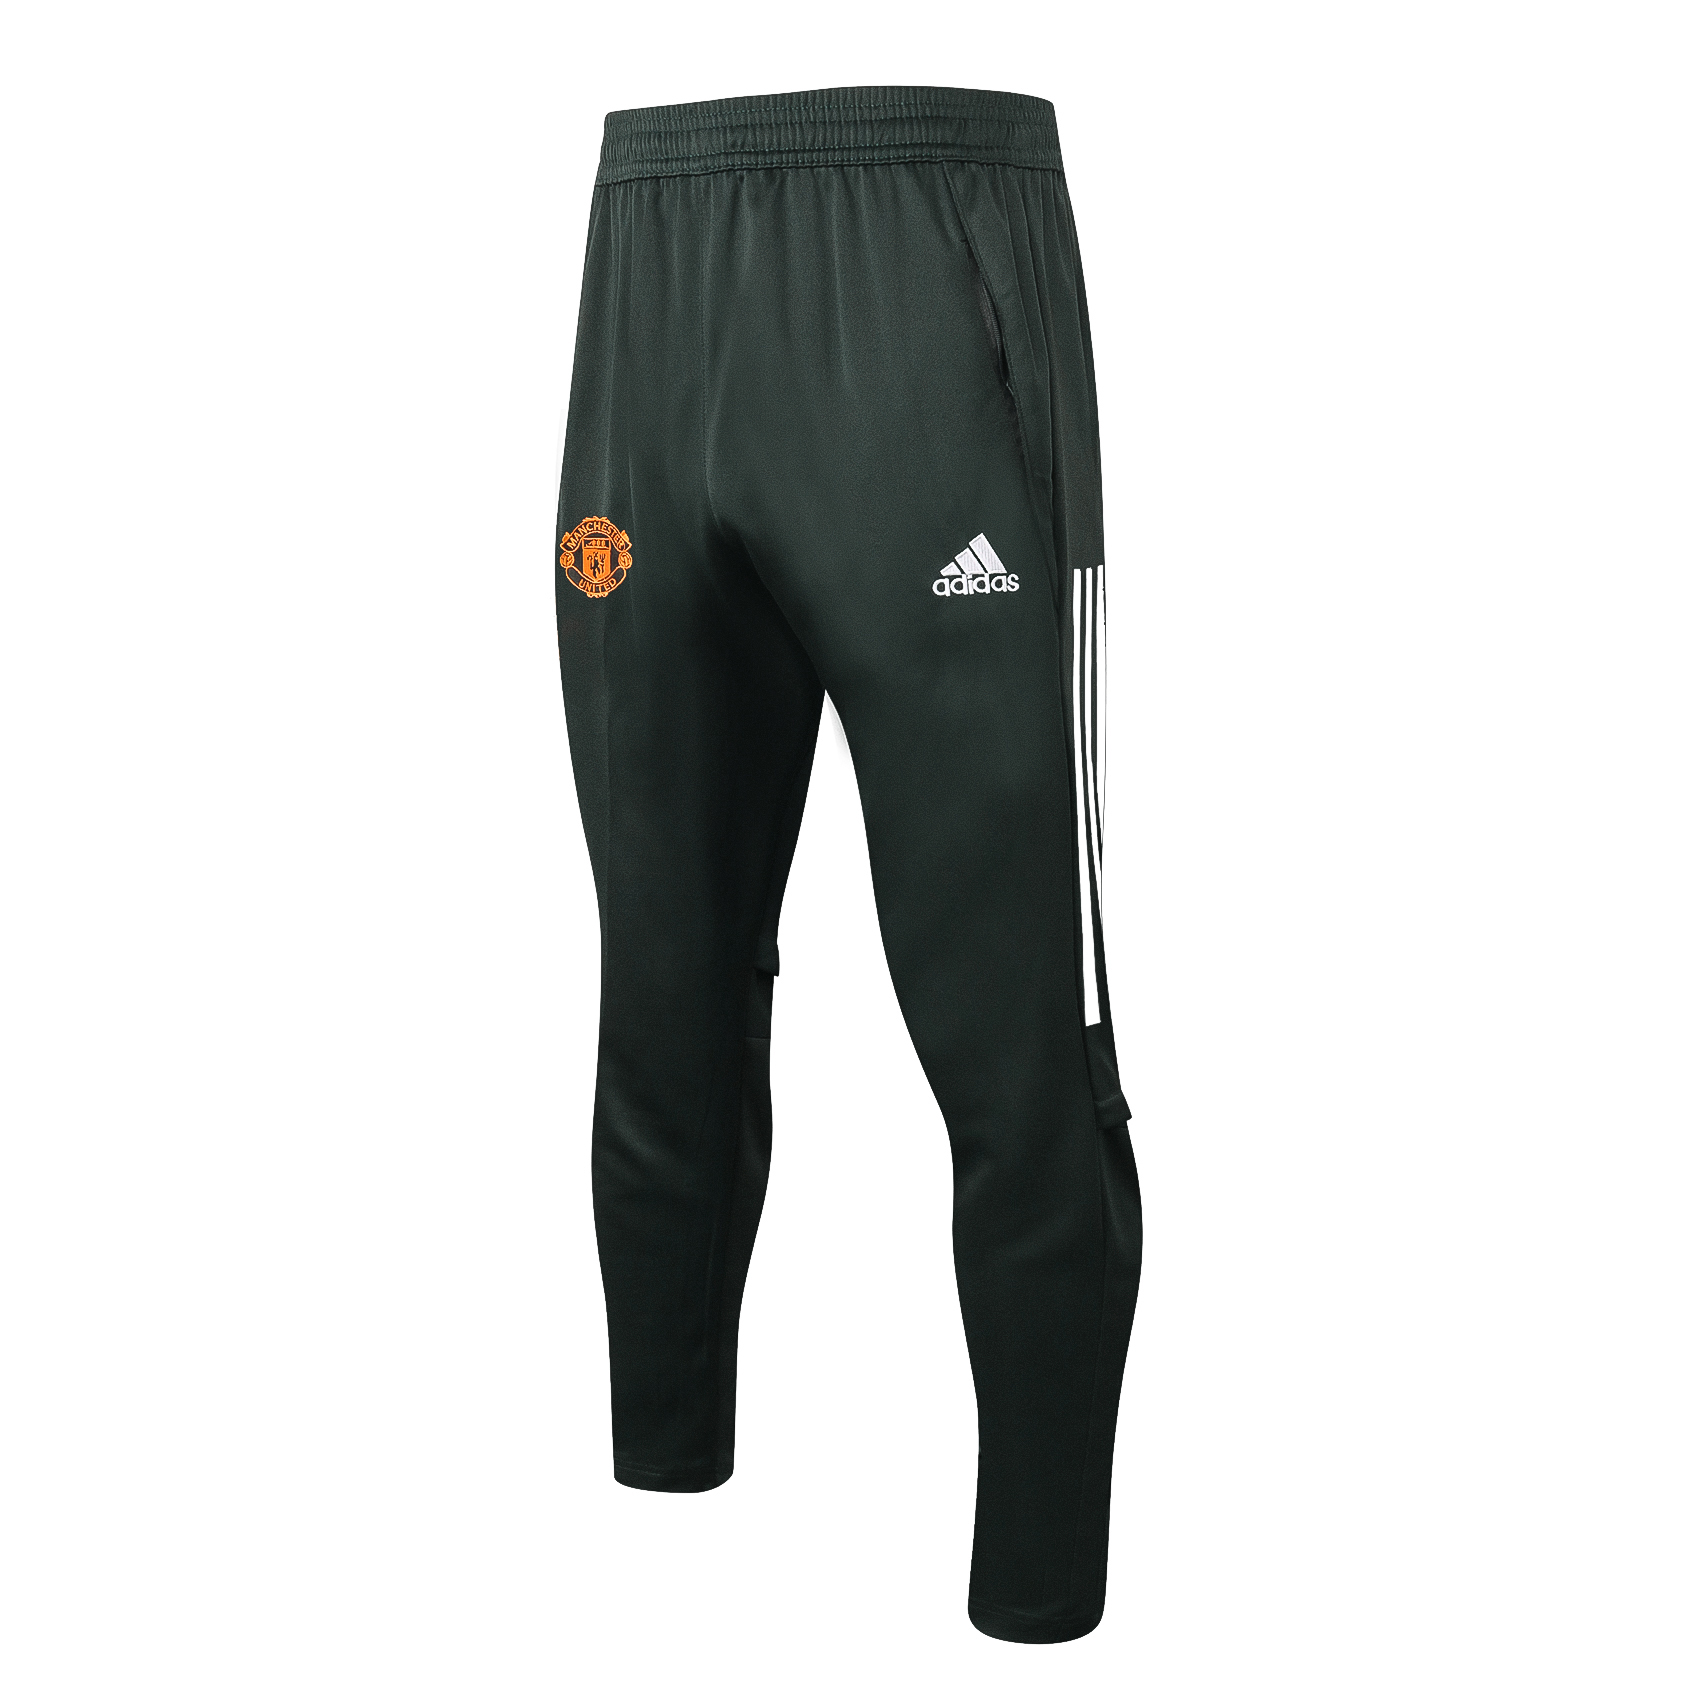 Manchester United Training Pants 2020 2021 – Green